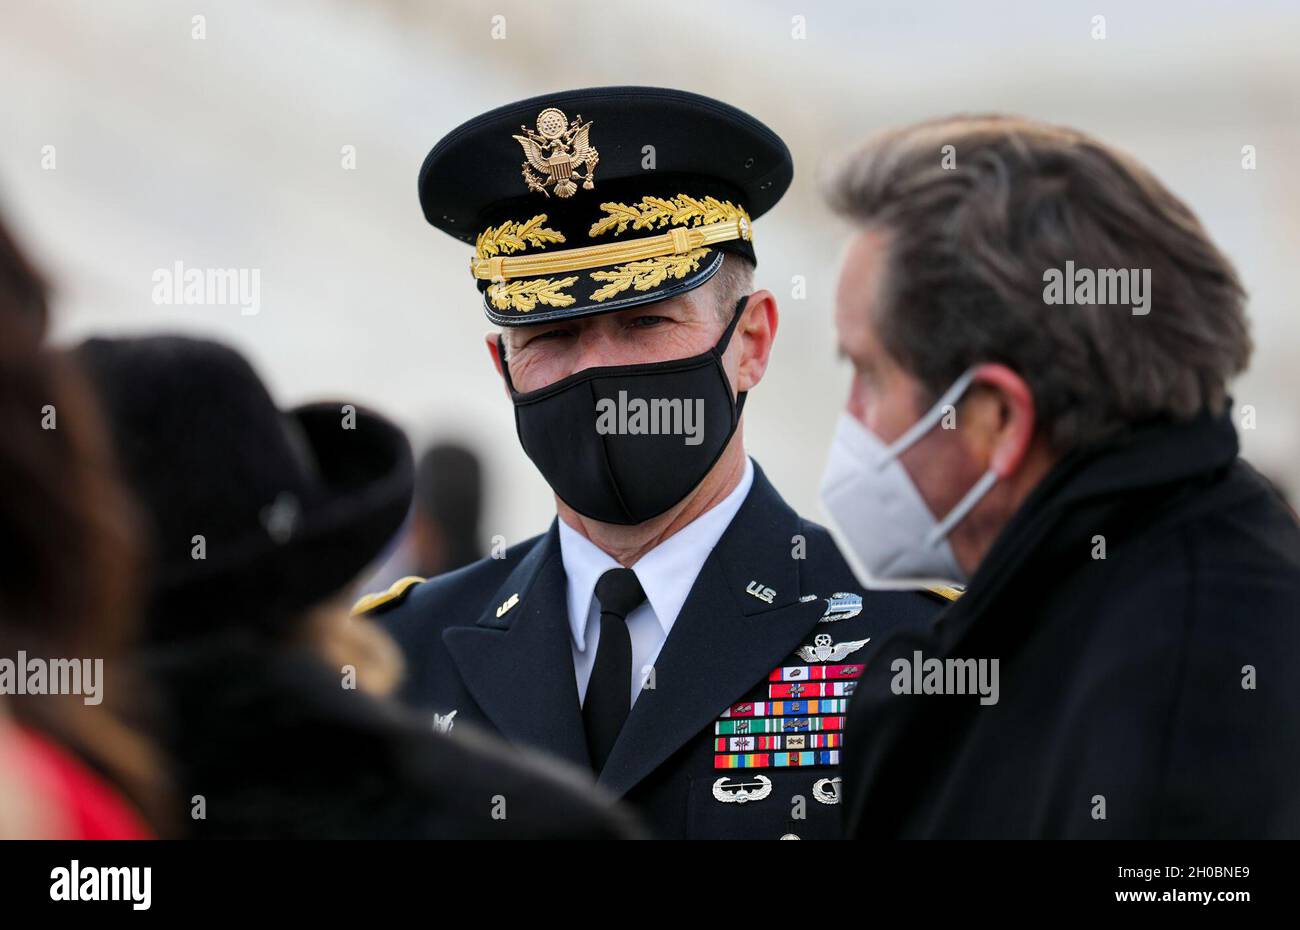 Army Chief of Staff,  Gen. James McConville,  attends the Presidential Inauguration Ceremony of Joseph R. Biden Jr. at the U.S. Capitol in Washington, D.C, Jan 20, 2021. The Joint Chiefs of Staff is the body of the most senior uniformed leaders within the United States Department of Defense, that advises the president of the United States, the secretary of defense, the Homeland Security Council, and the National Security Council on military matters. Stock Photo